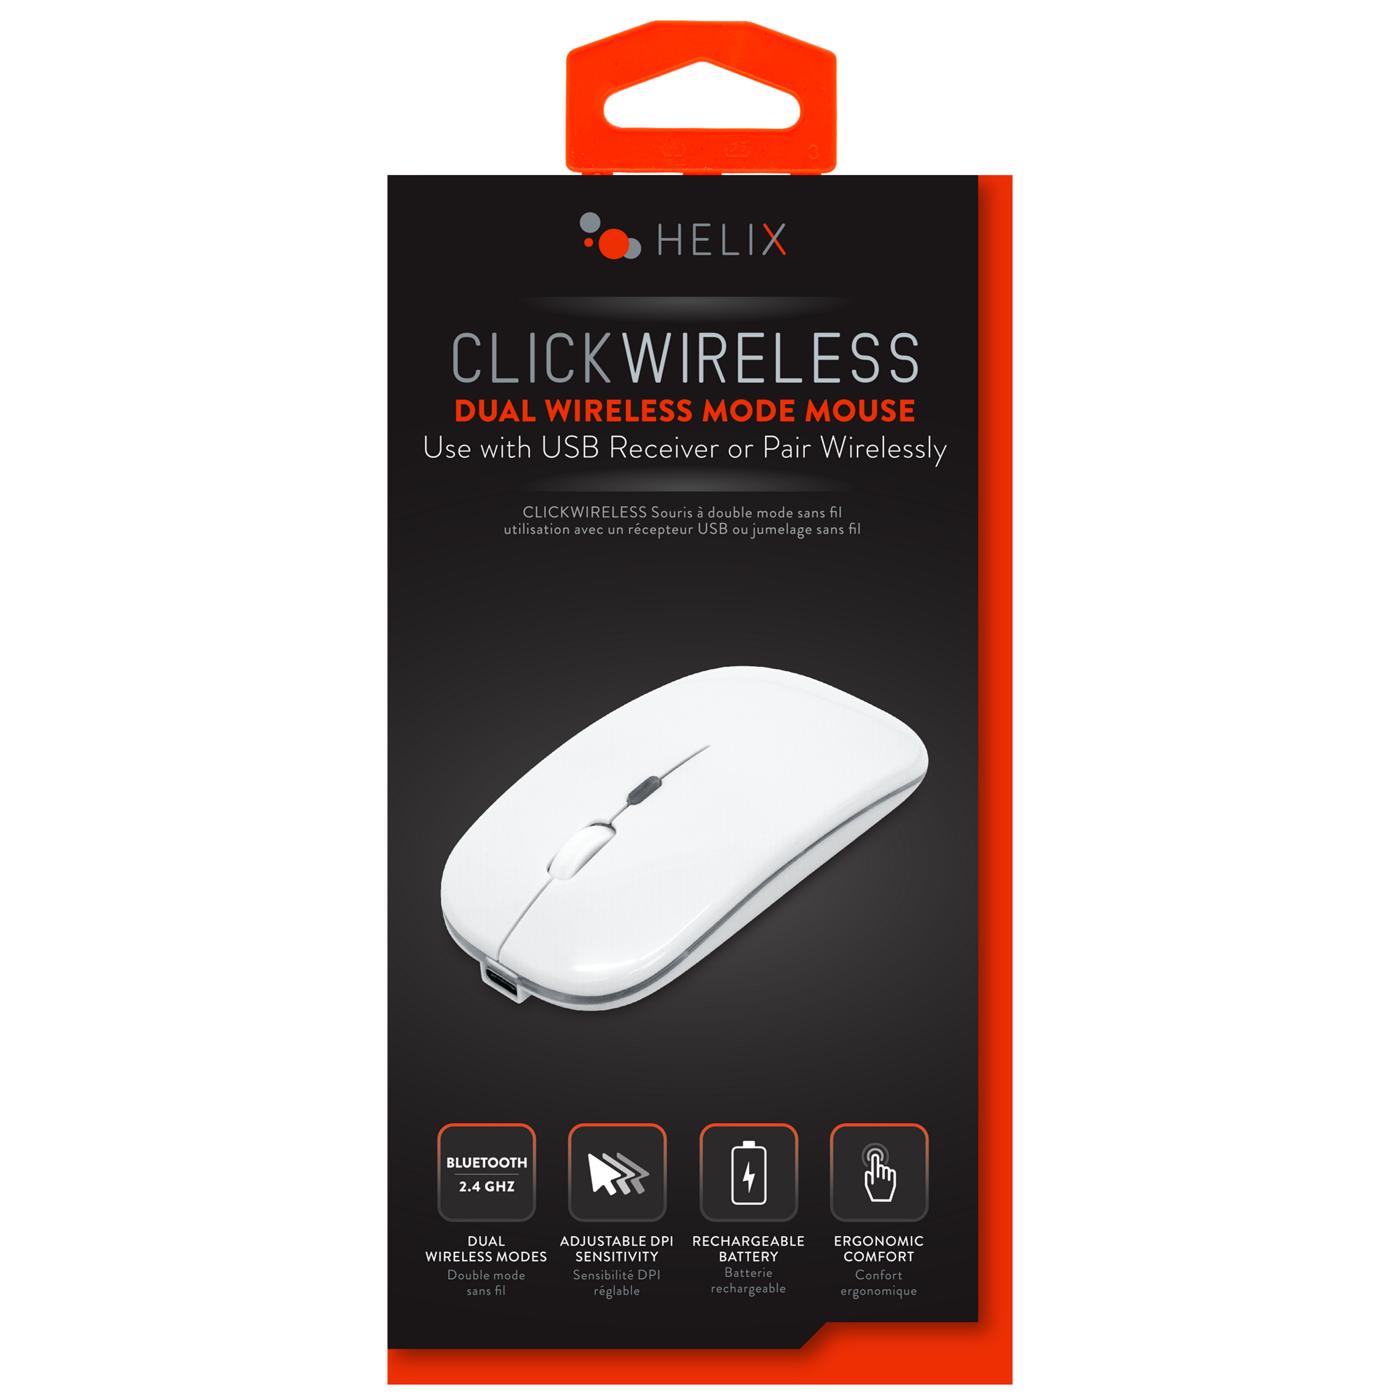 Helix Dual Wireless Mode Mouse - White; image 1 of 3